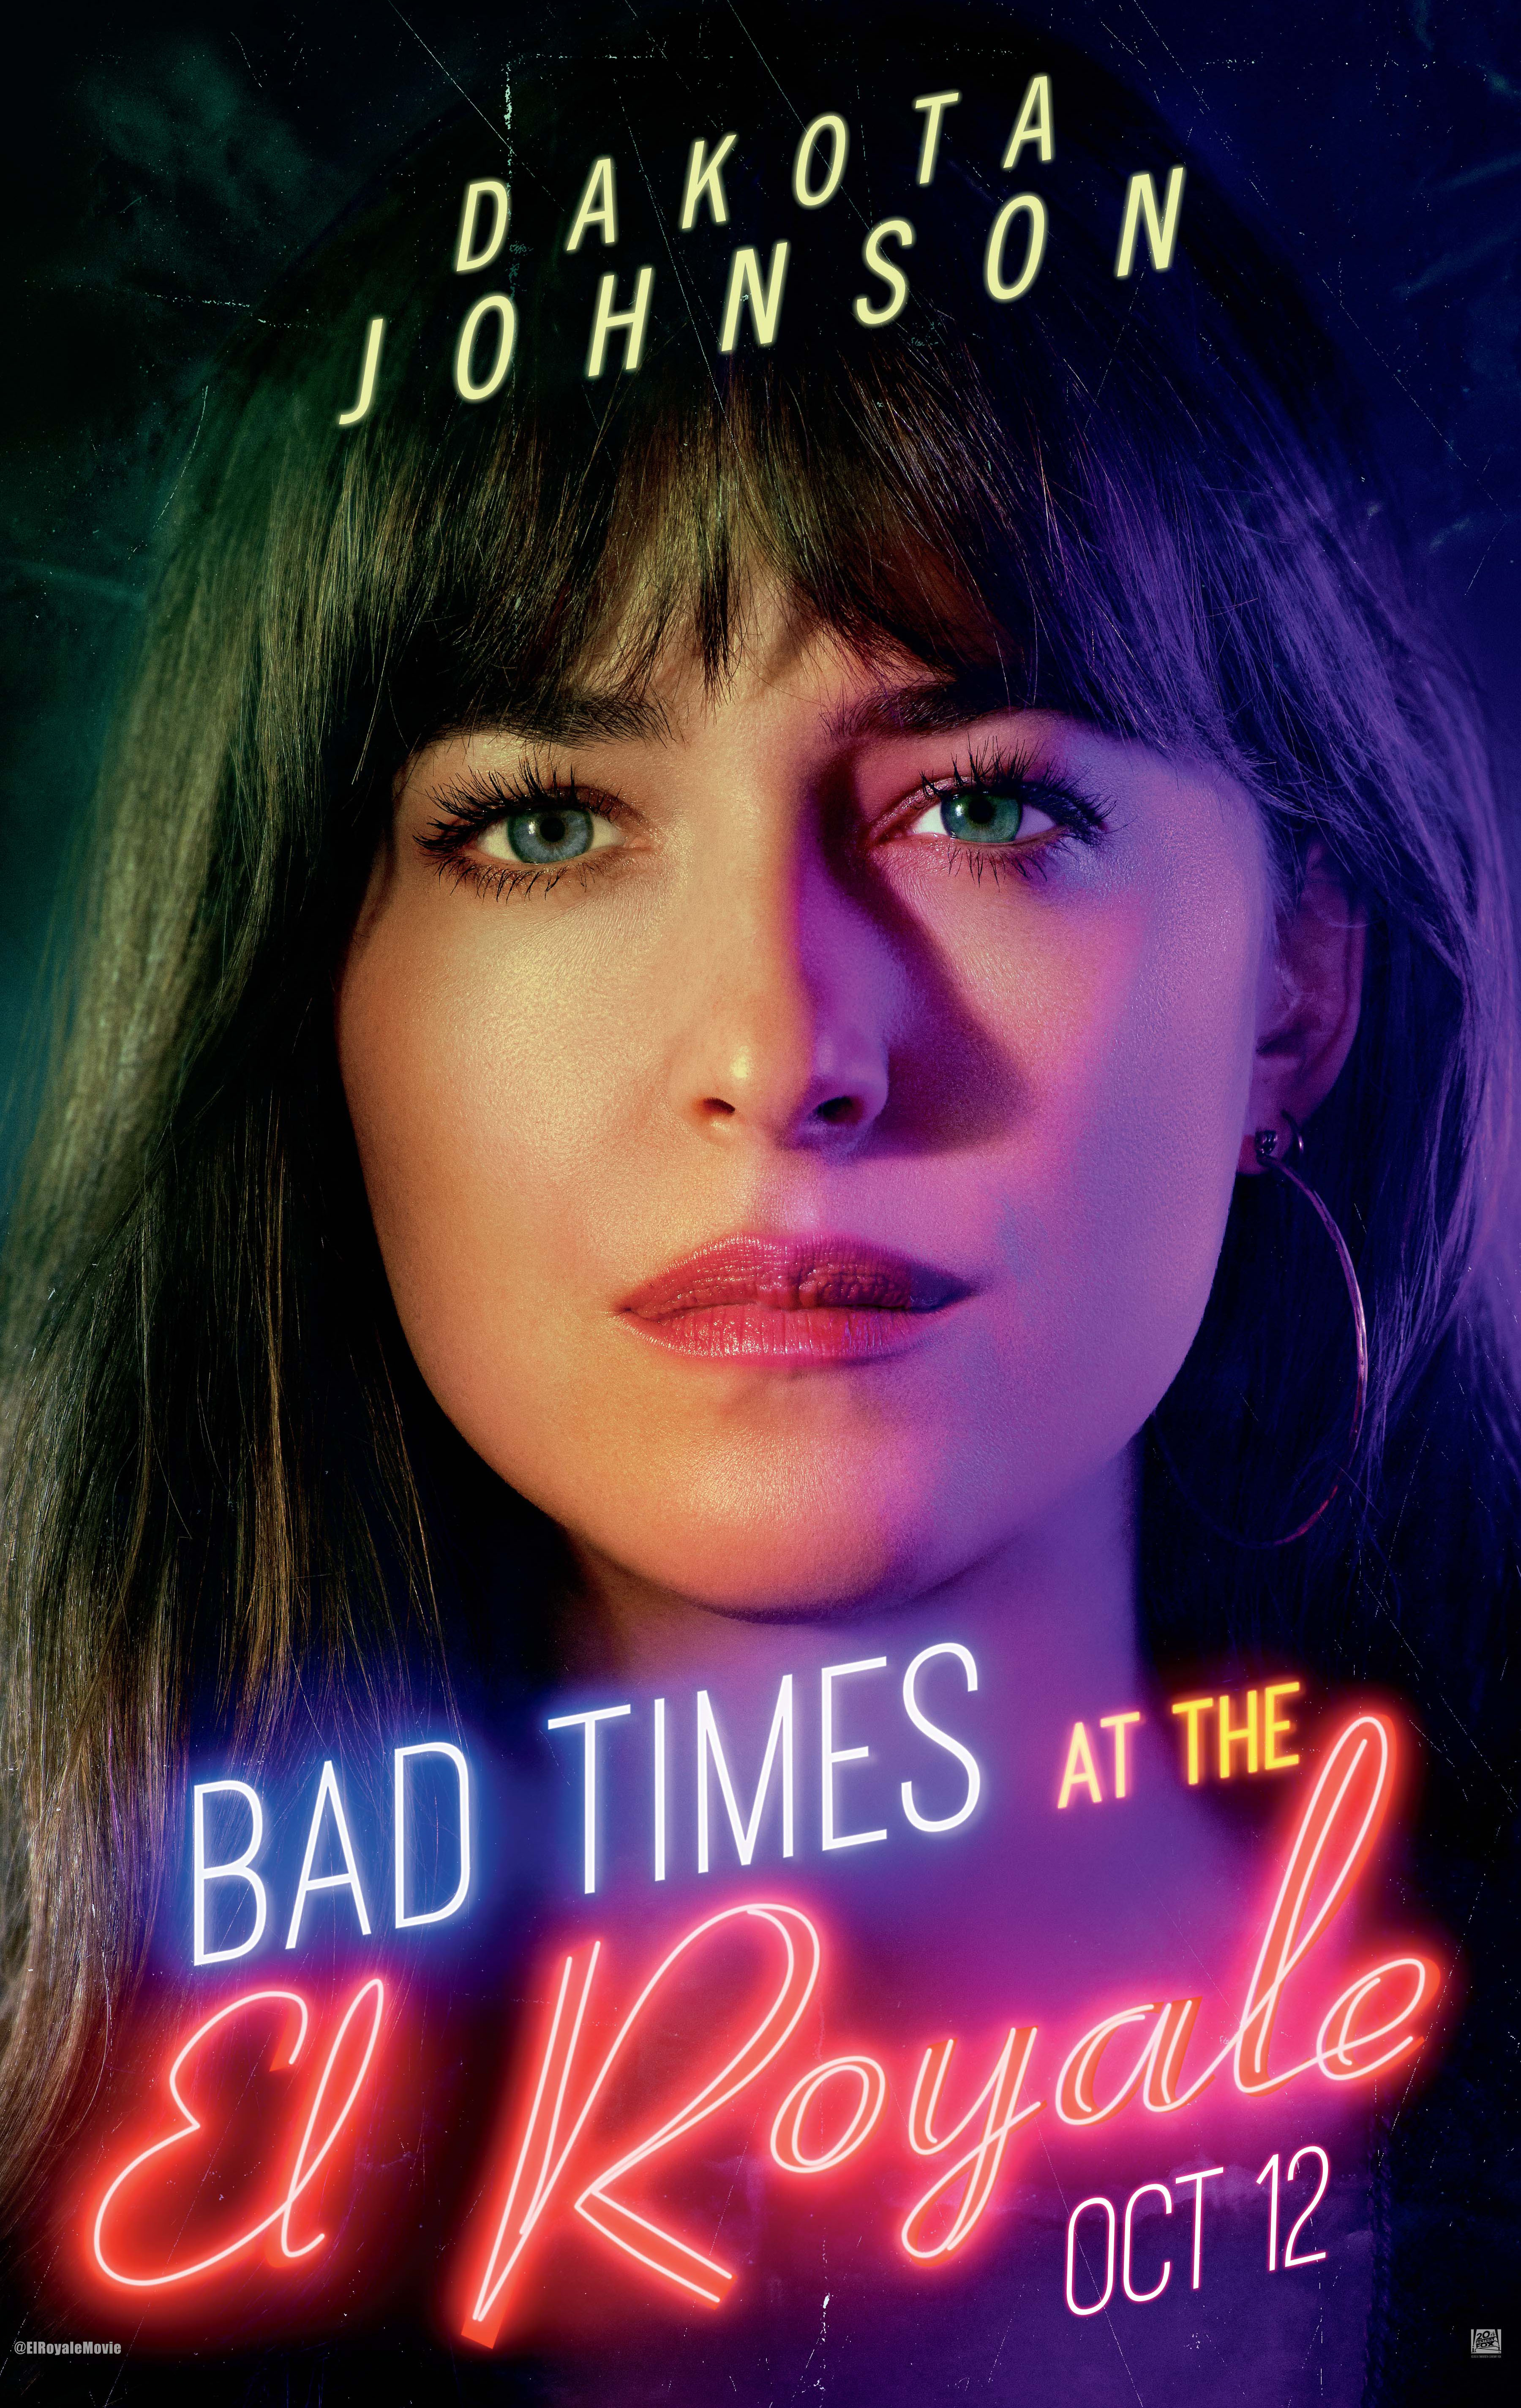 Bad Times At The El Royale poster (20th Century Fox)